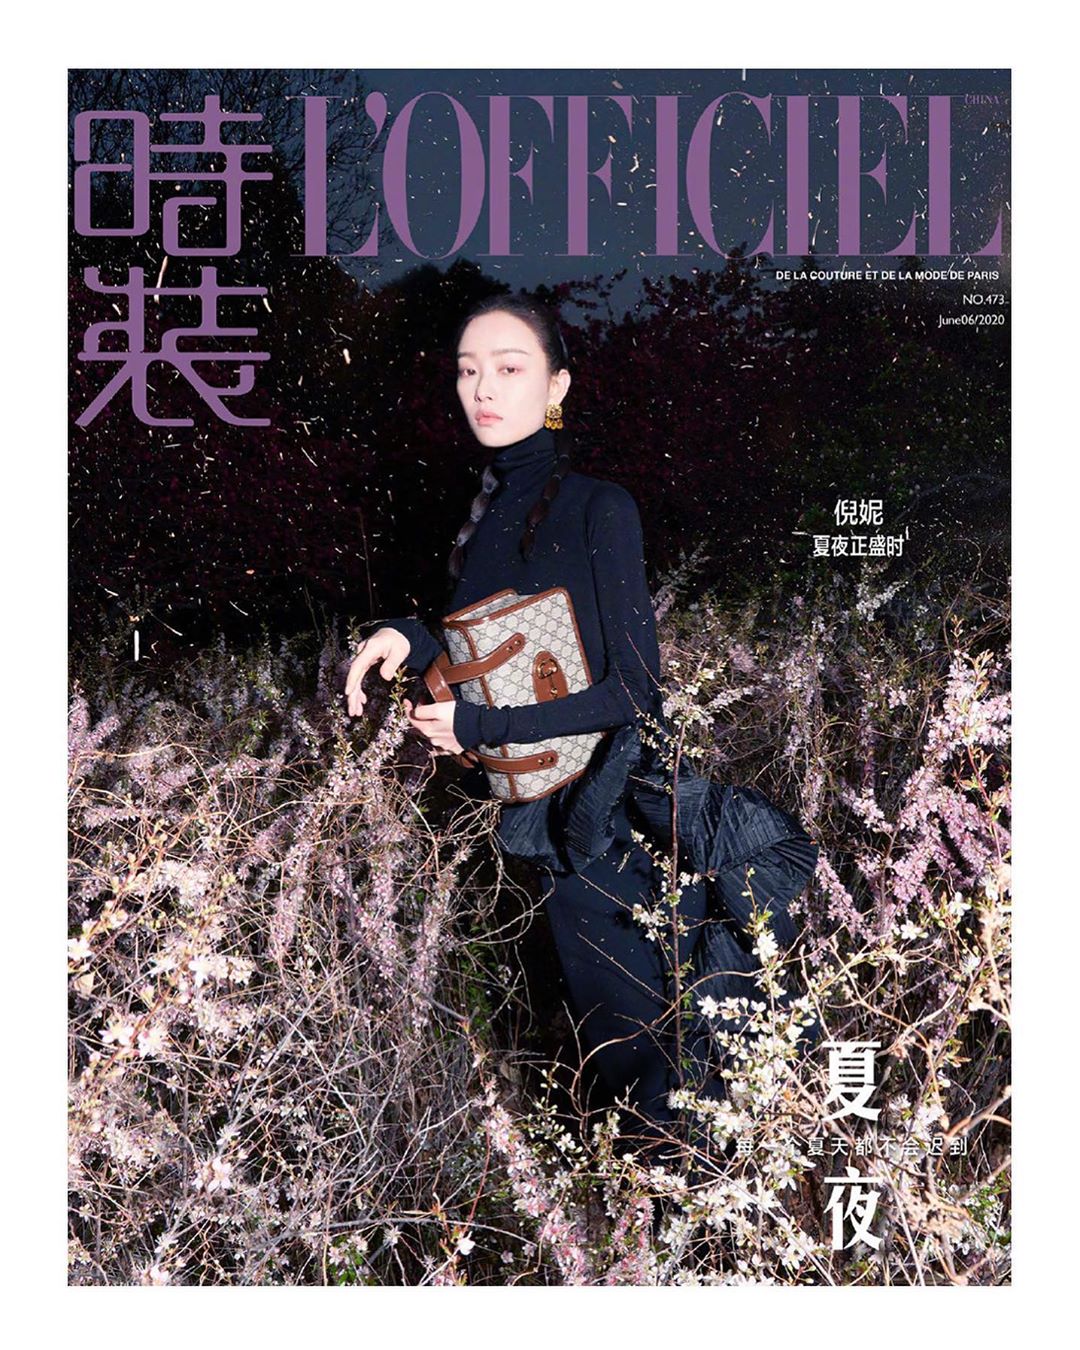 Gucci - Ni Ni @captainmiao features on the latest issue of @lofficielchina in #Gucci by @alessandro_michele. Captured by FanXin, #NiNi is styled by @yoann9 holding a #GucciHorsebit1955 bag. #GucciEdit...